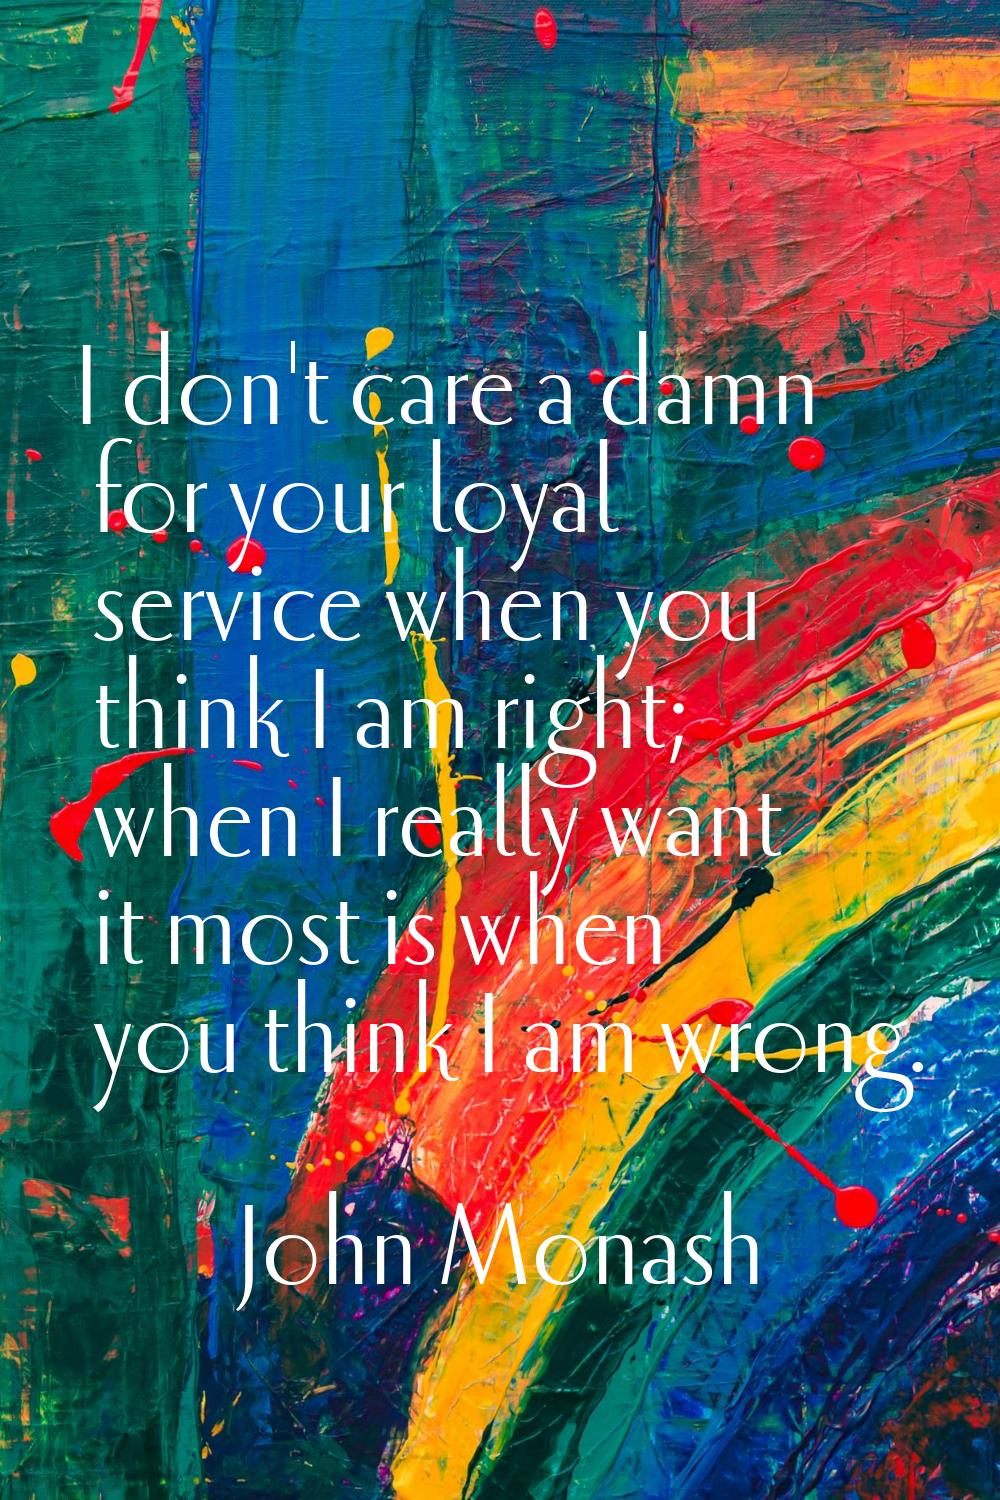 I don't care a damn for your loyal service when you think I am right; when I really want it most is